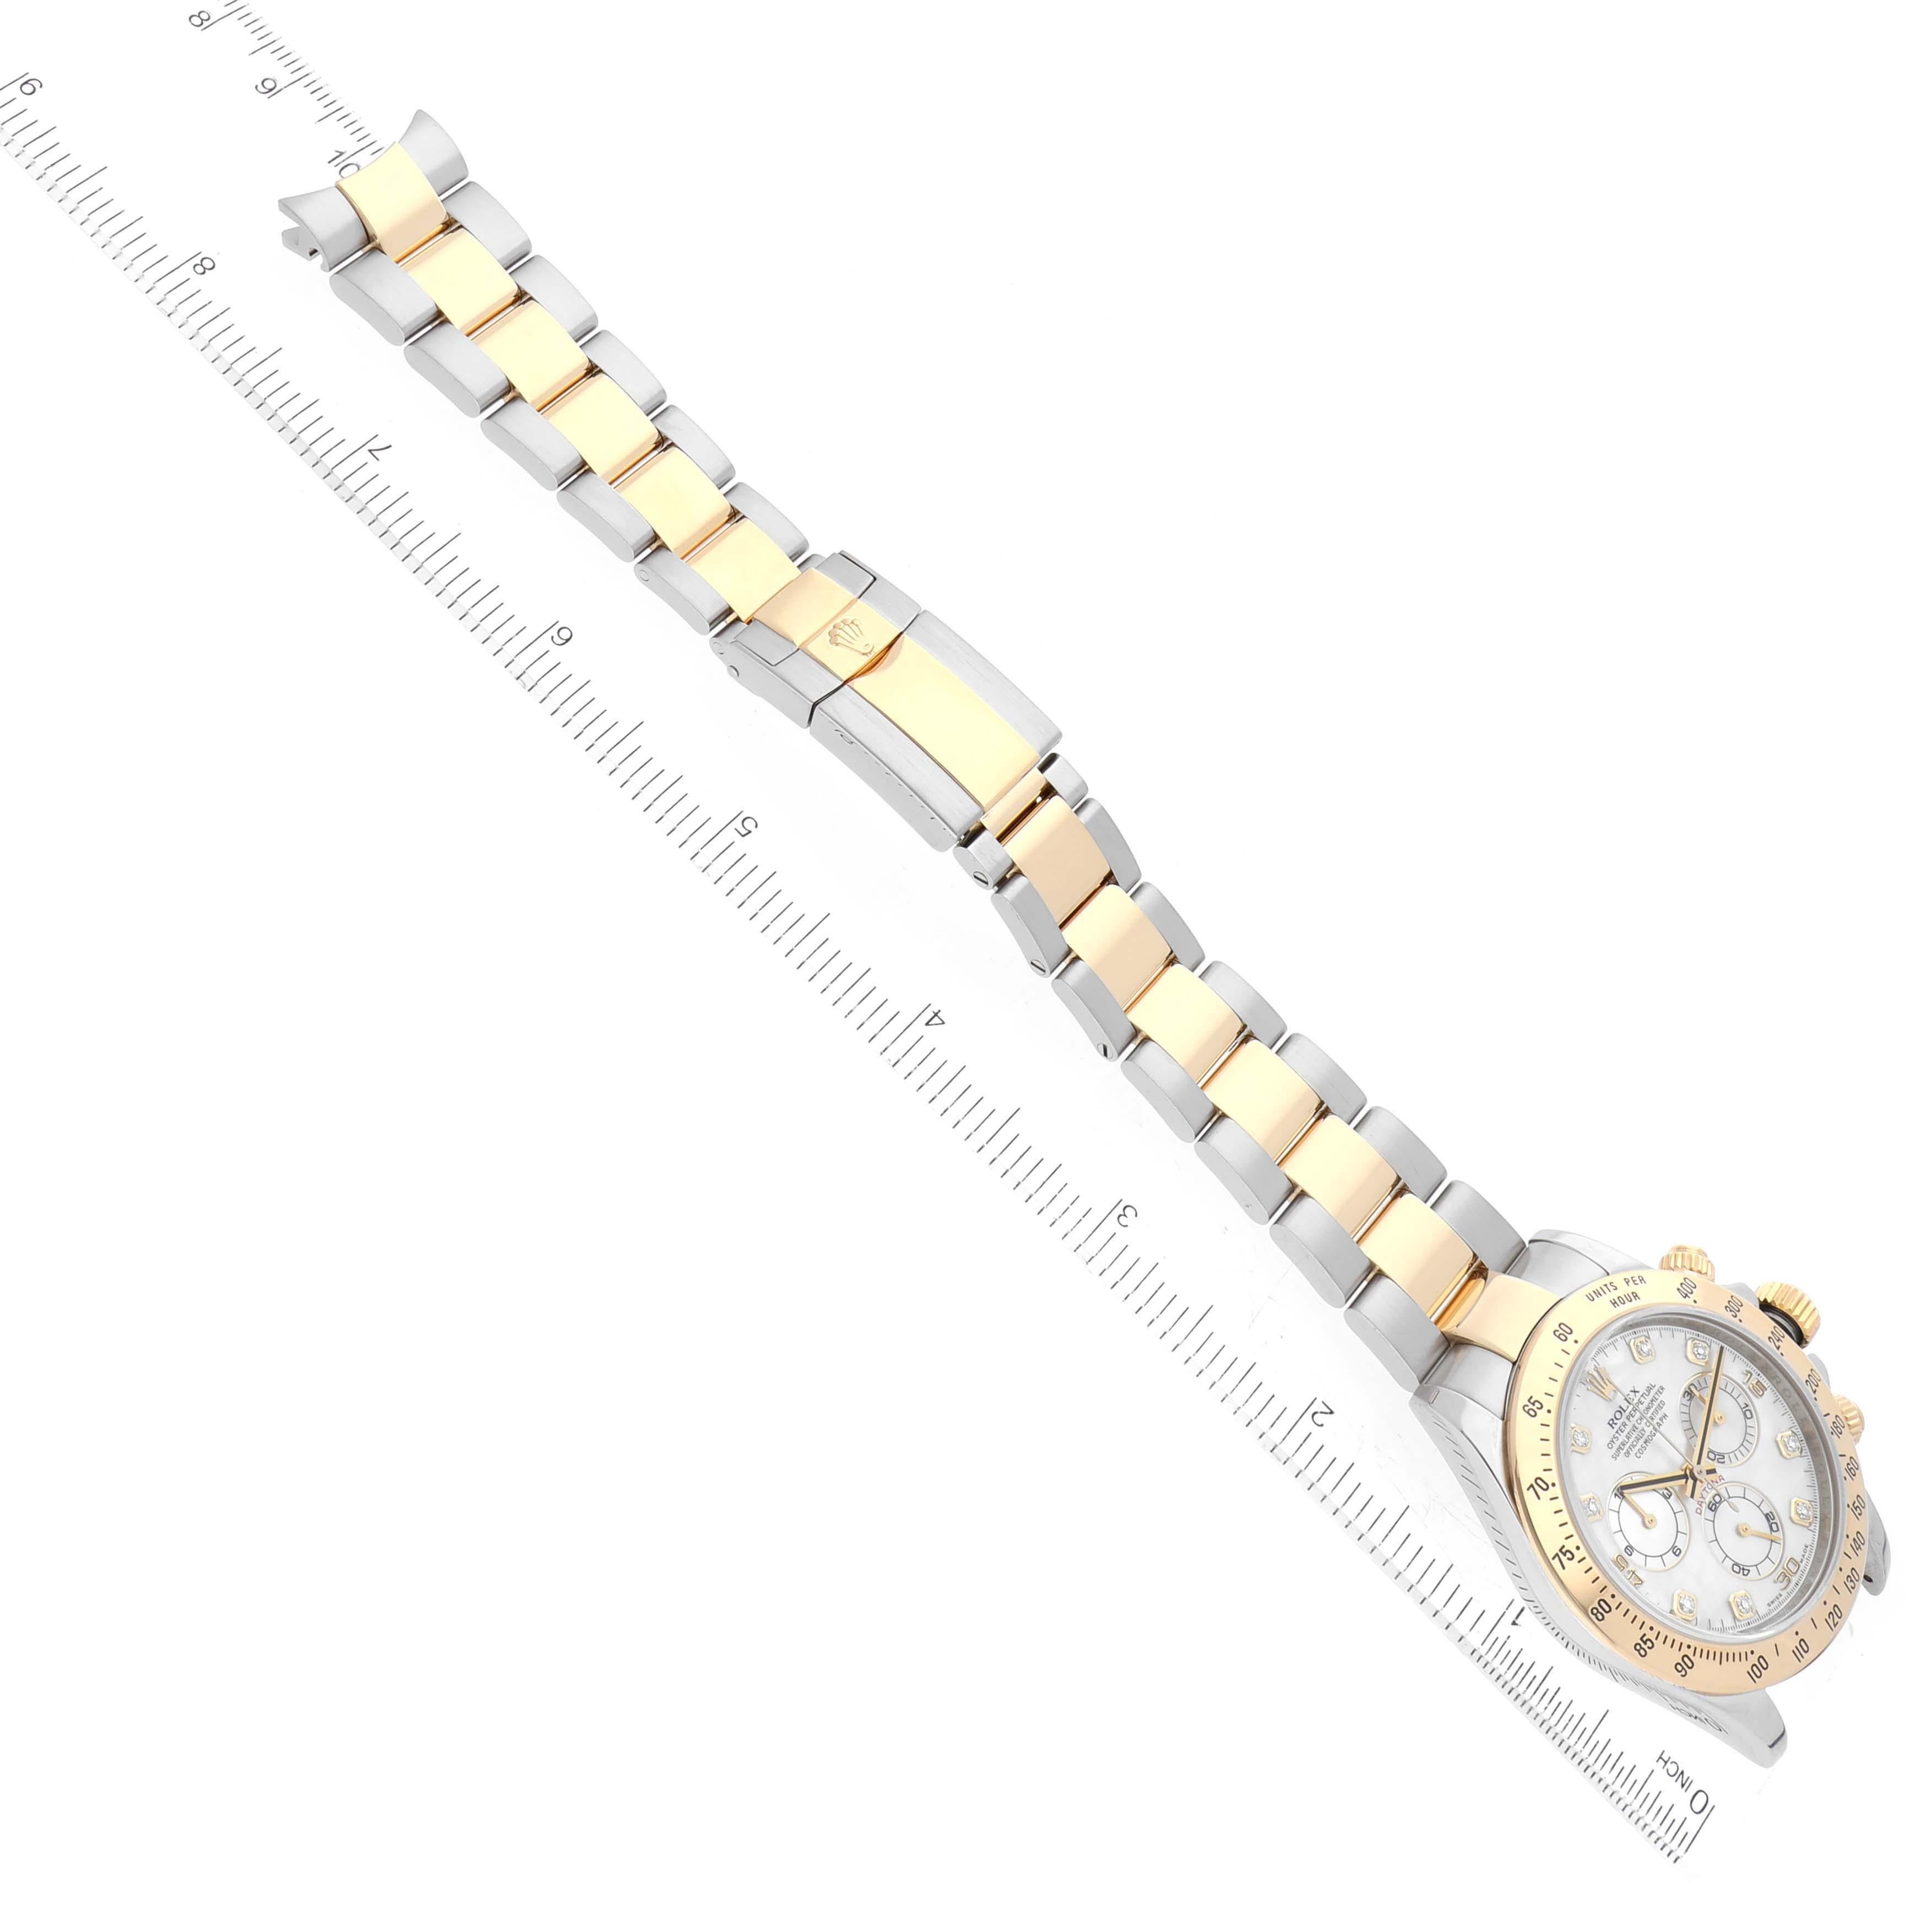 Rolex Daytona Yellow Gold Steel Mother of Pearl Diamond Mens Watch 116523 For Sale 7